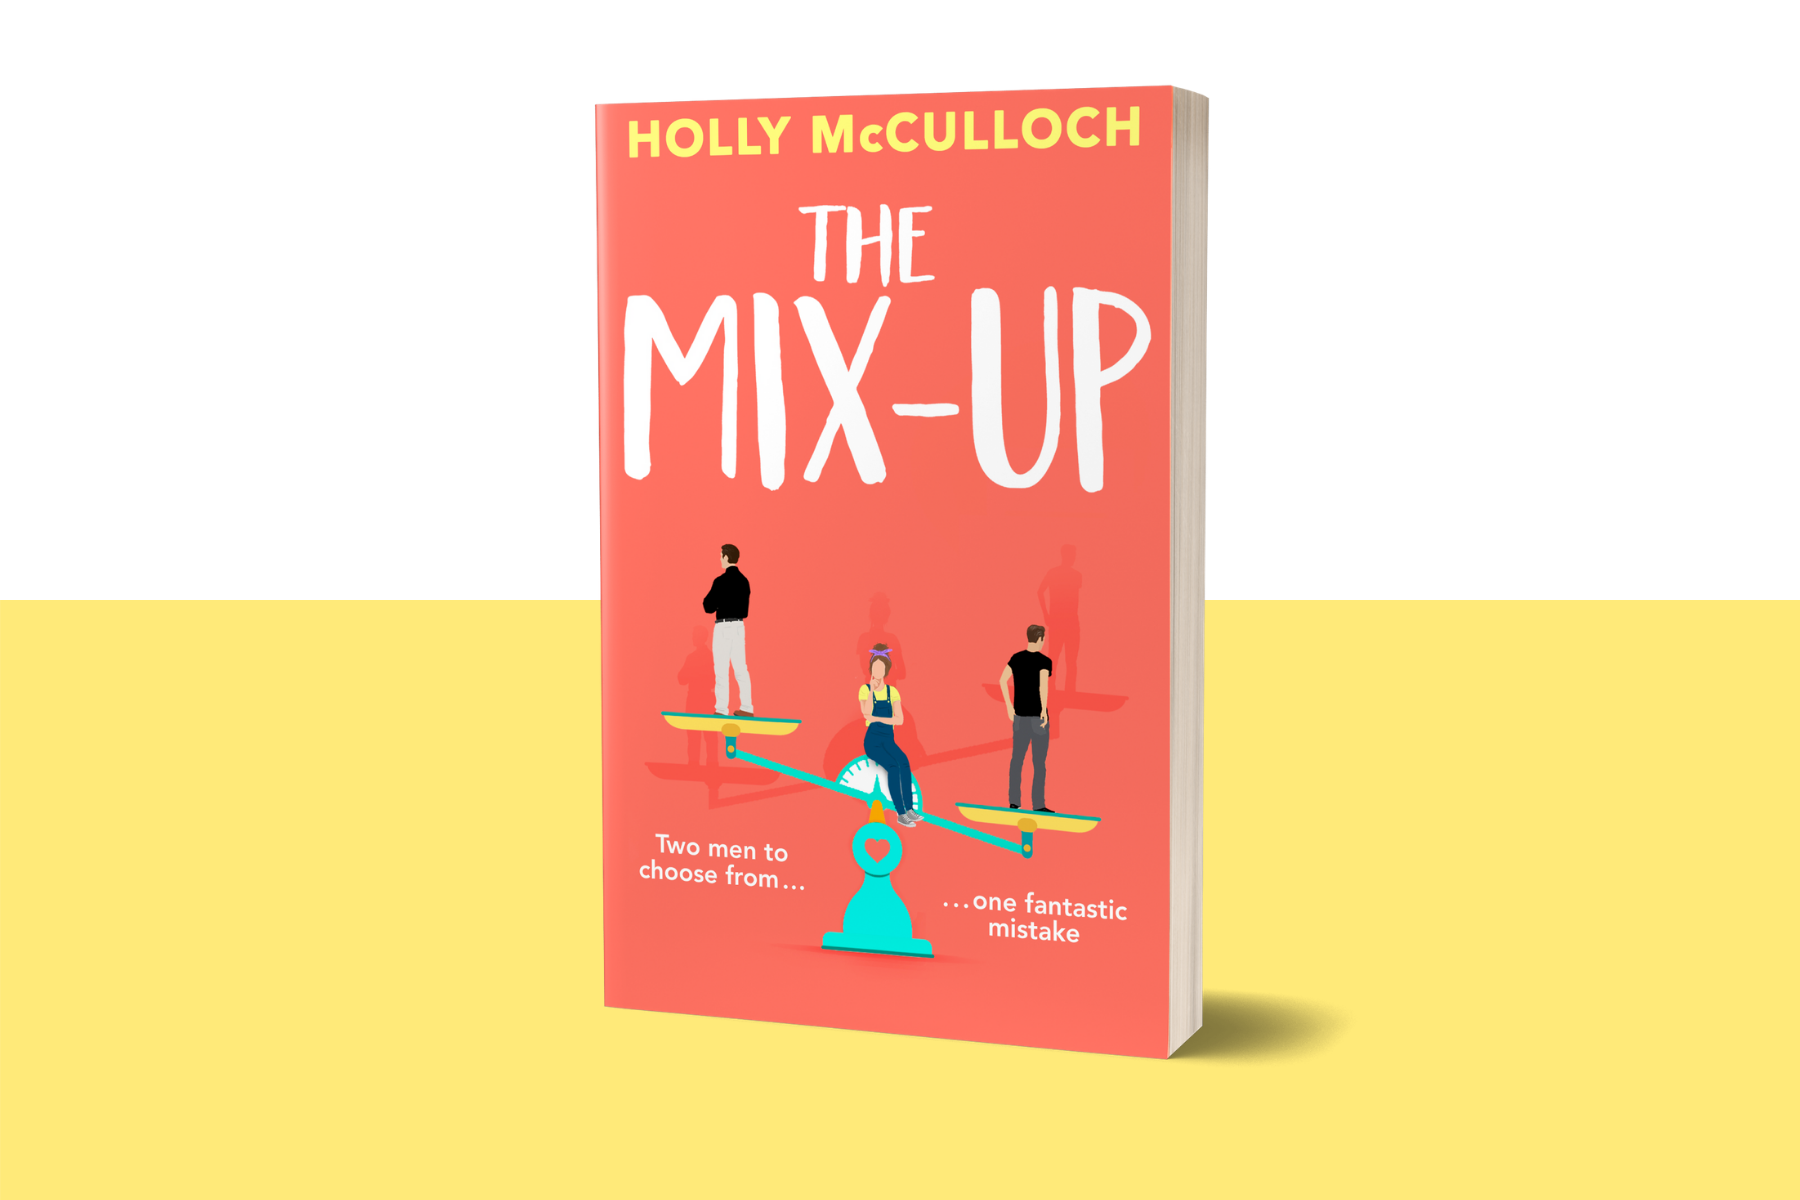 The Mix-Up by Holly McCulloch in paperback against a white and yellow background.